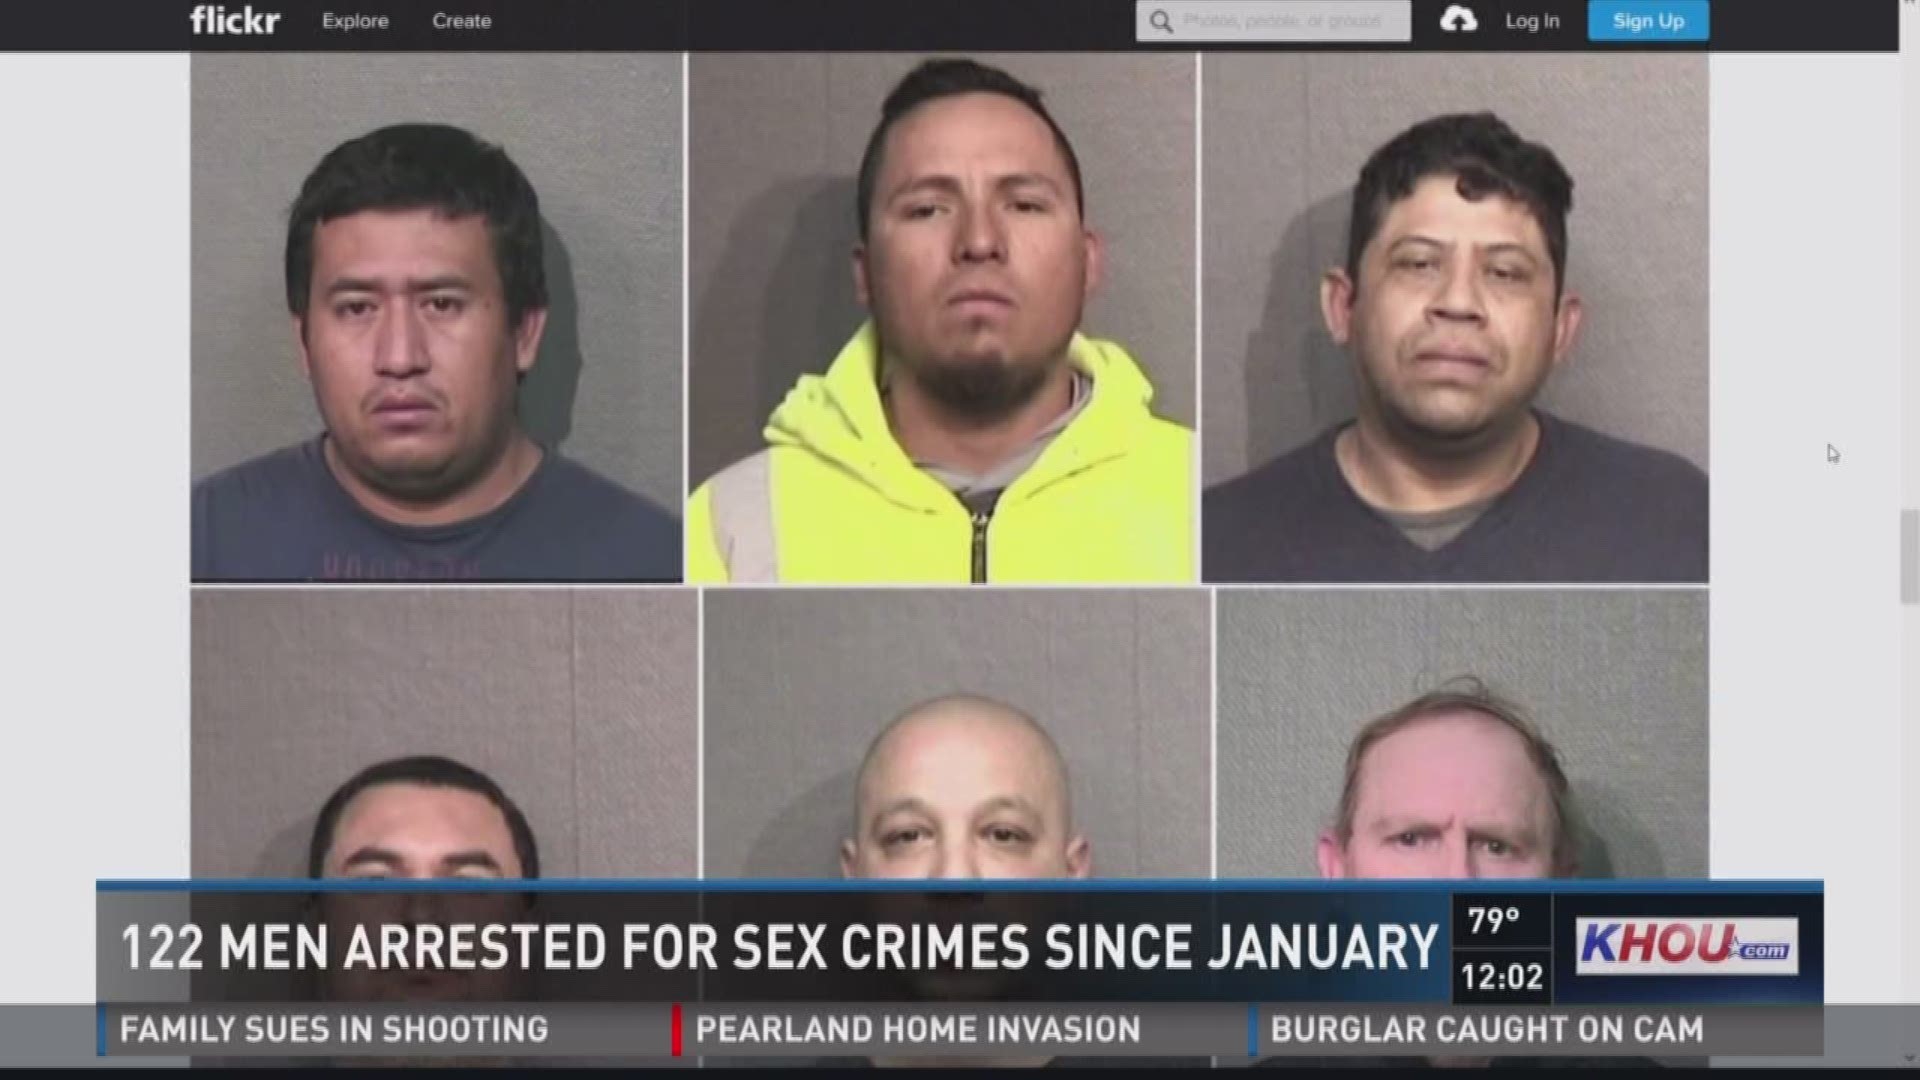 The Houston Police Department made the arrests from Jan. 1 to March 31 in an effort to crack down on human trafficking.